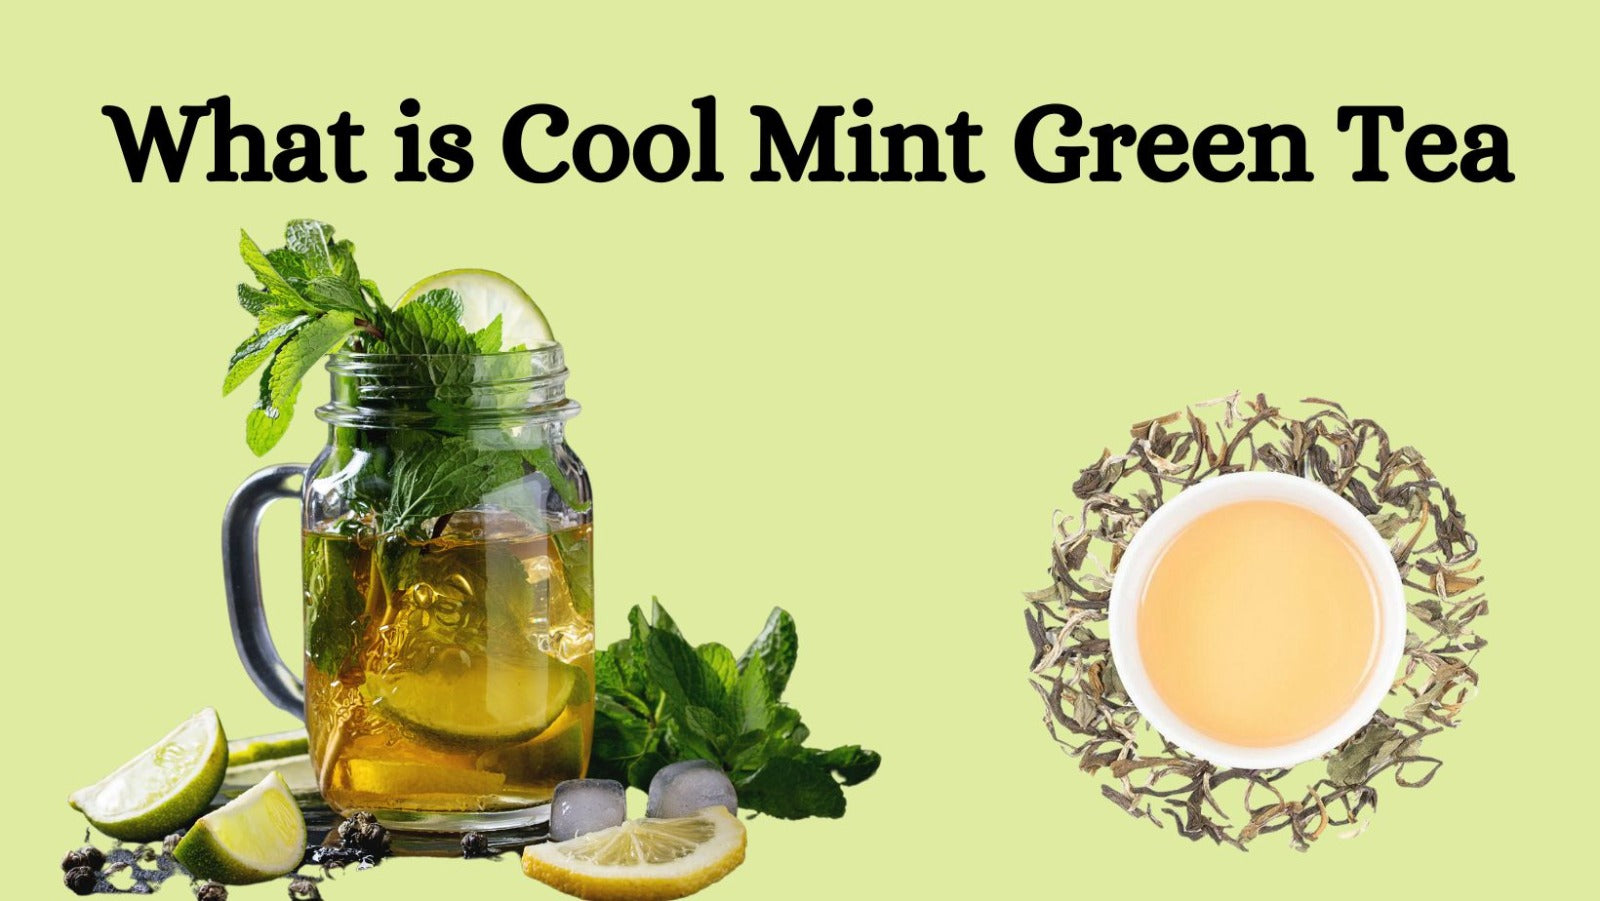 What is Cool Mint Green Tea